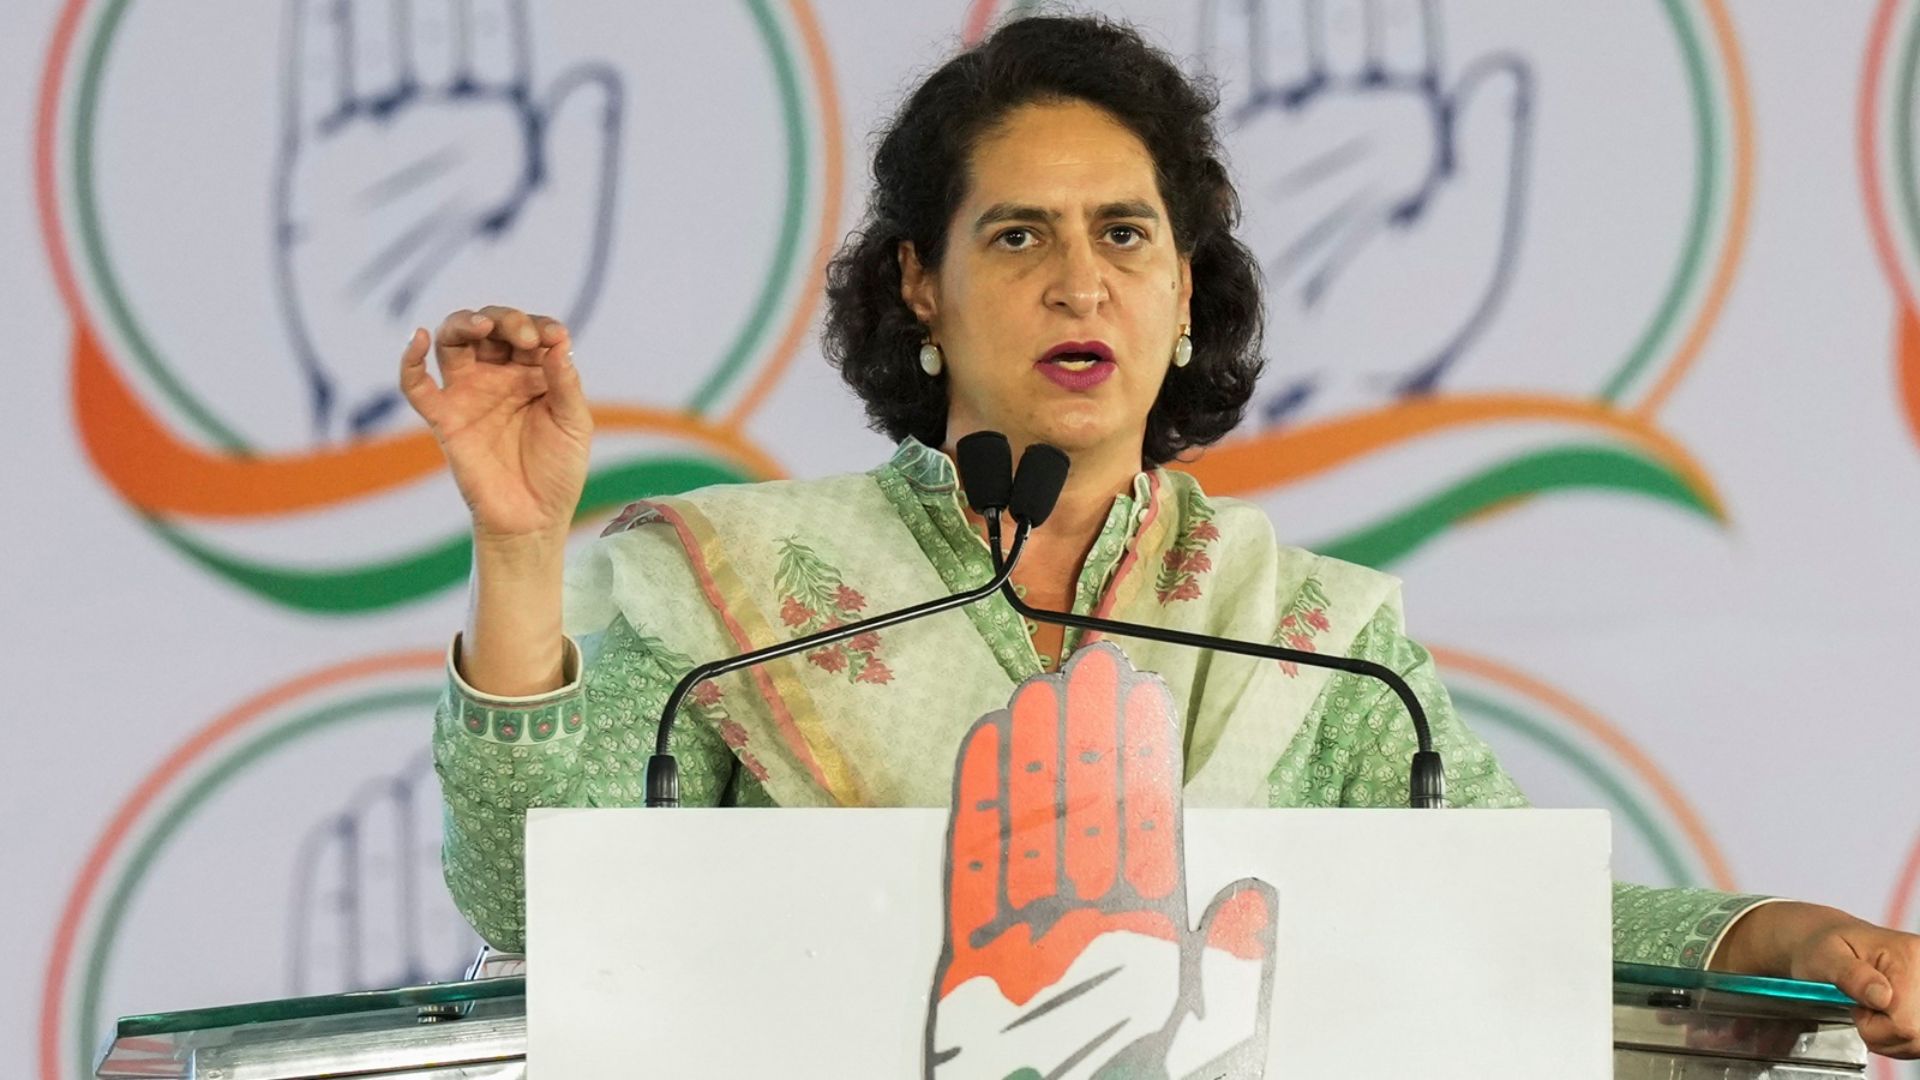 Priyanka Gandhi: “You are being told on TV that there is no leader like Modiji but truth is…”